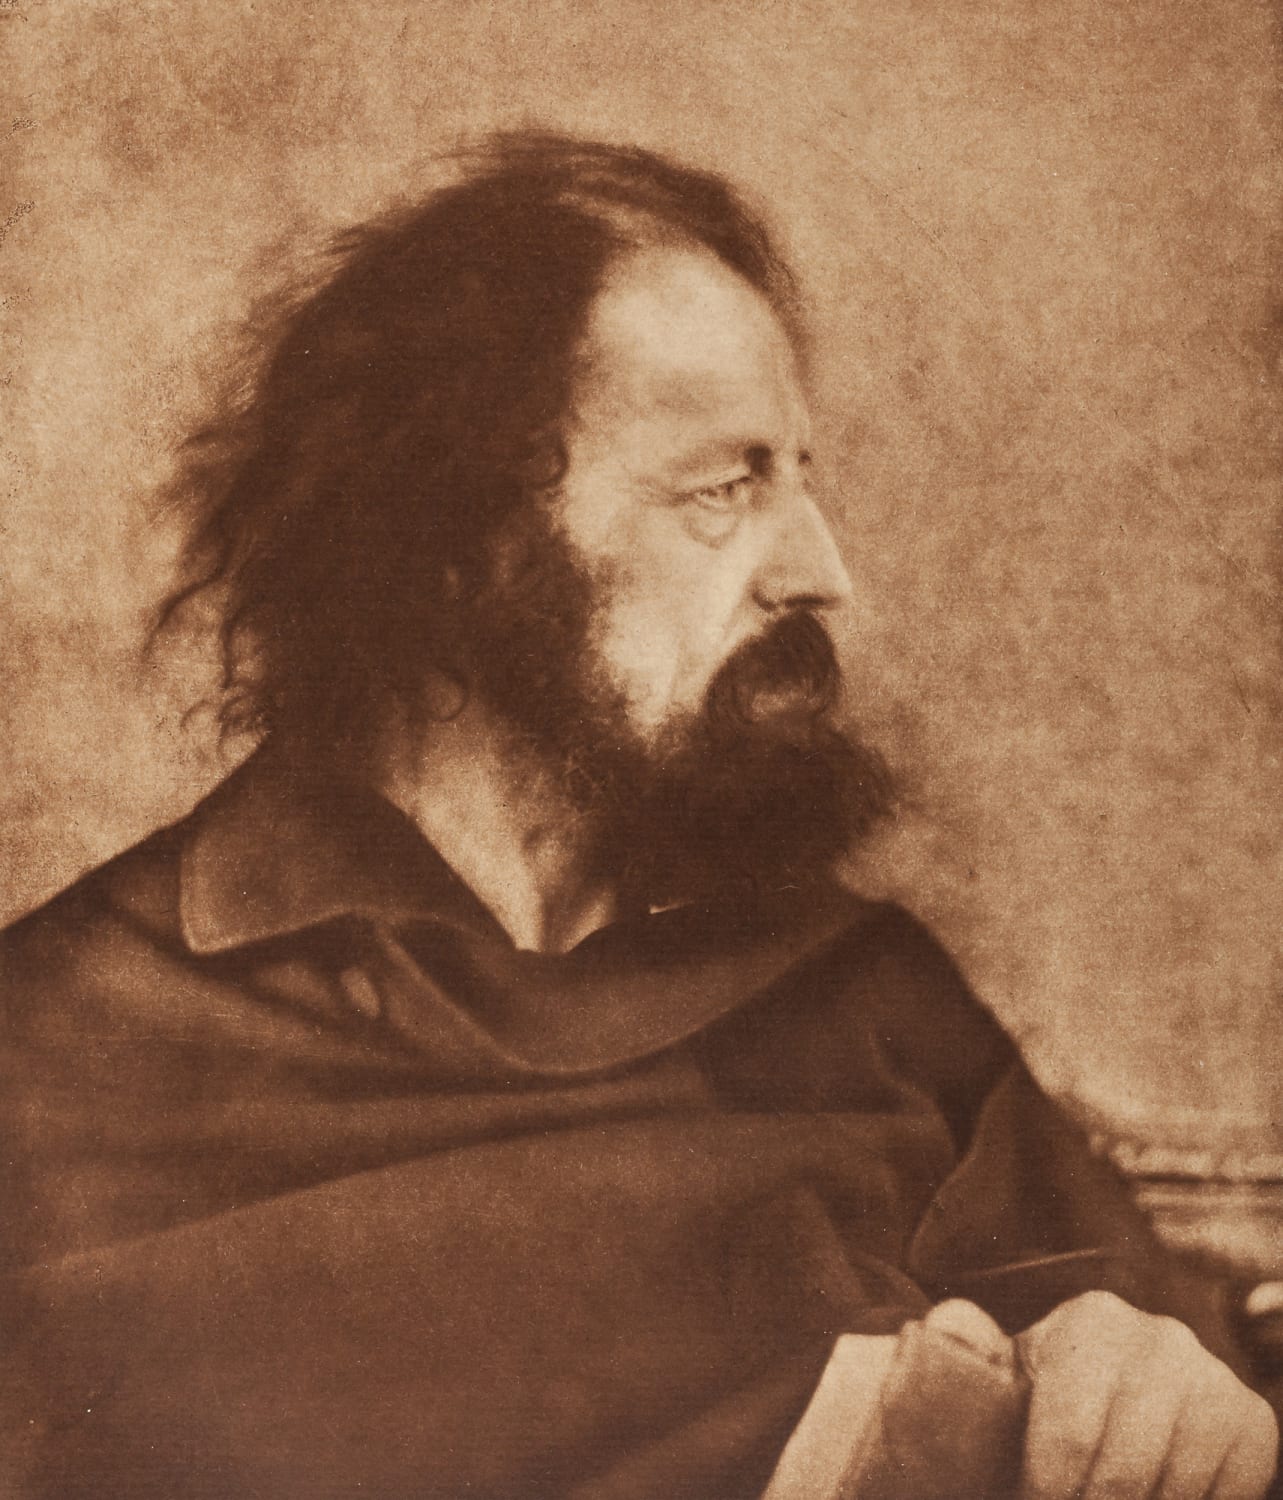 Exhibition of works by Julia Margaret Cameron to be shown online